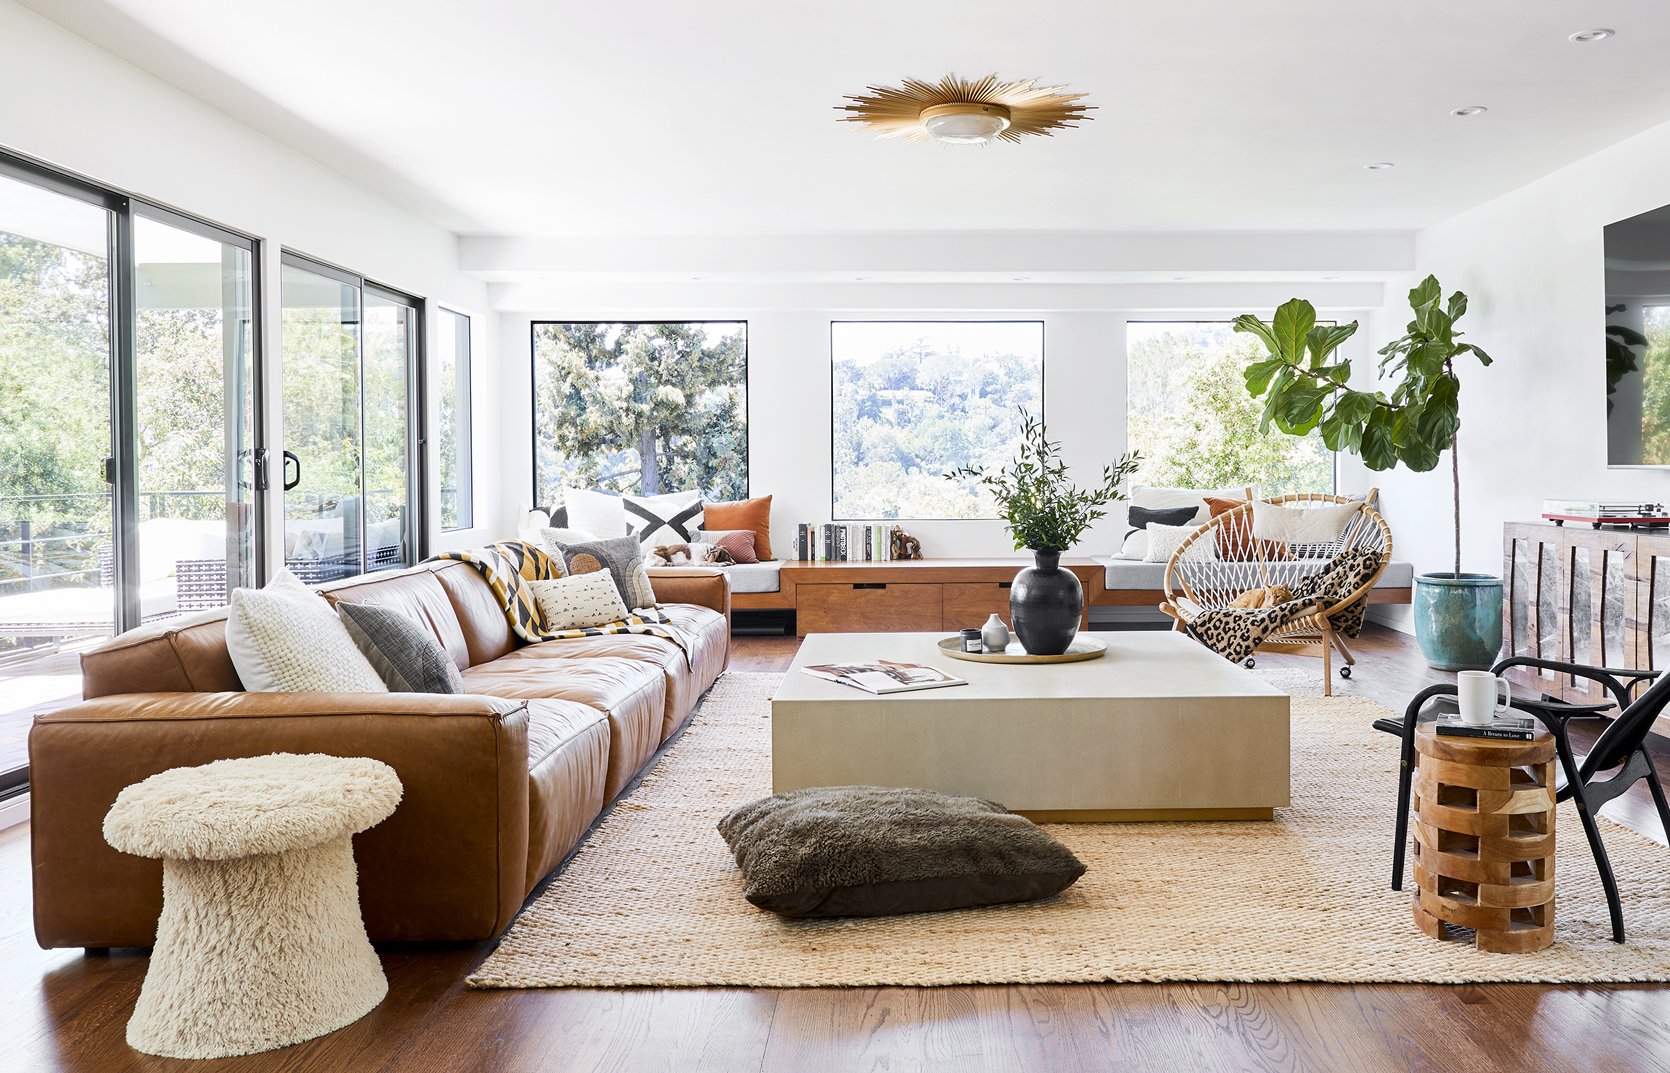 Tour This Electic Midcentury Modern House Designed by ASOM Home + 10 Approachable Design Tricks Anyone Can Do